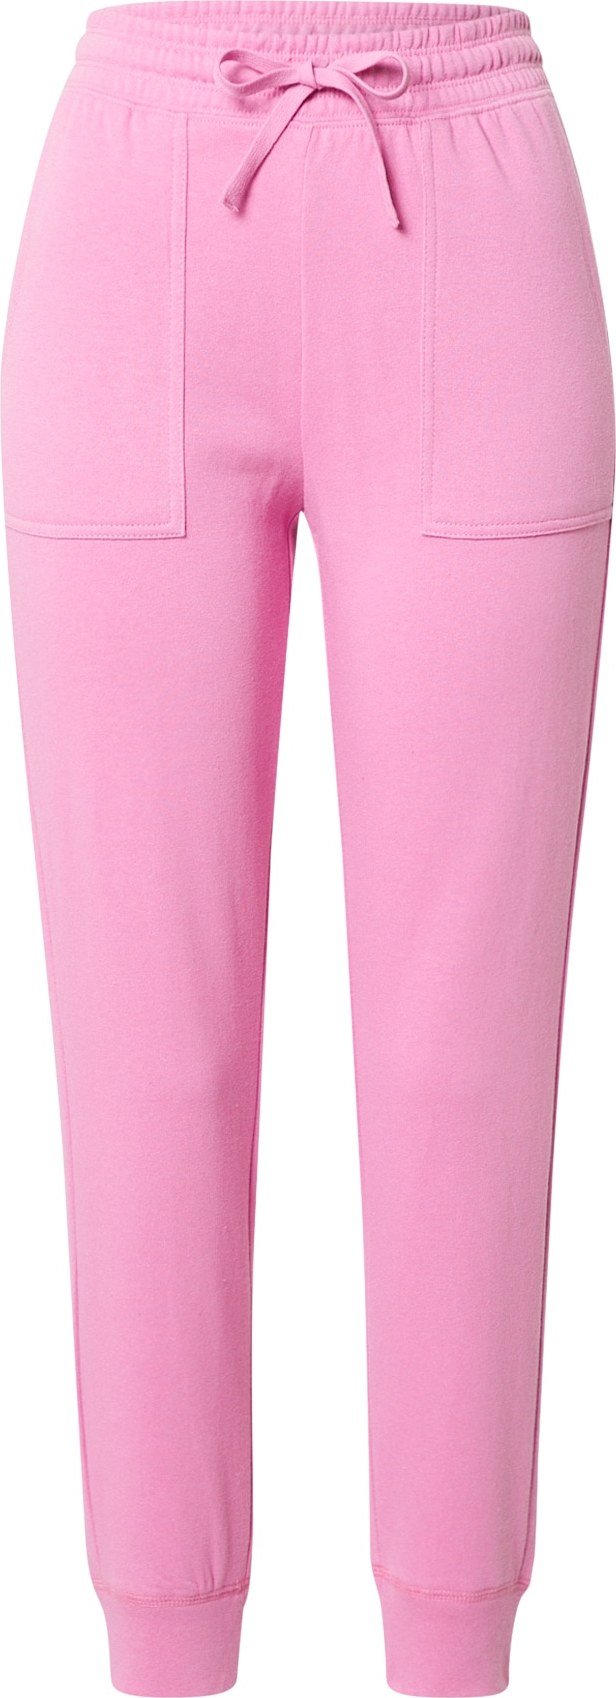 7 for all mankind Kalhoty pink